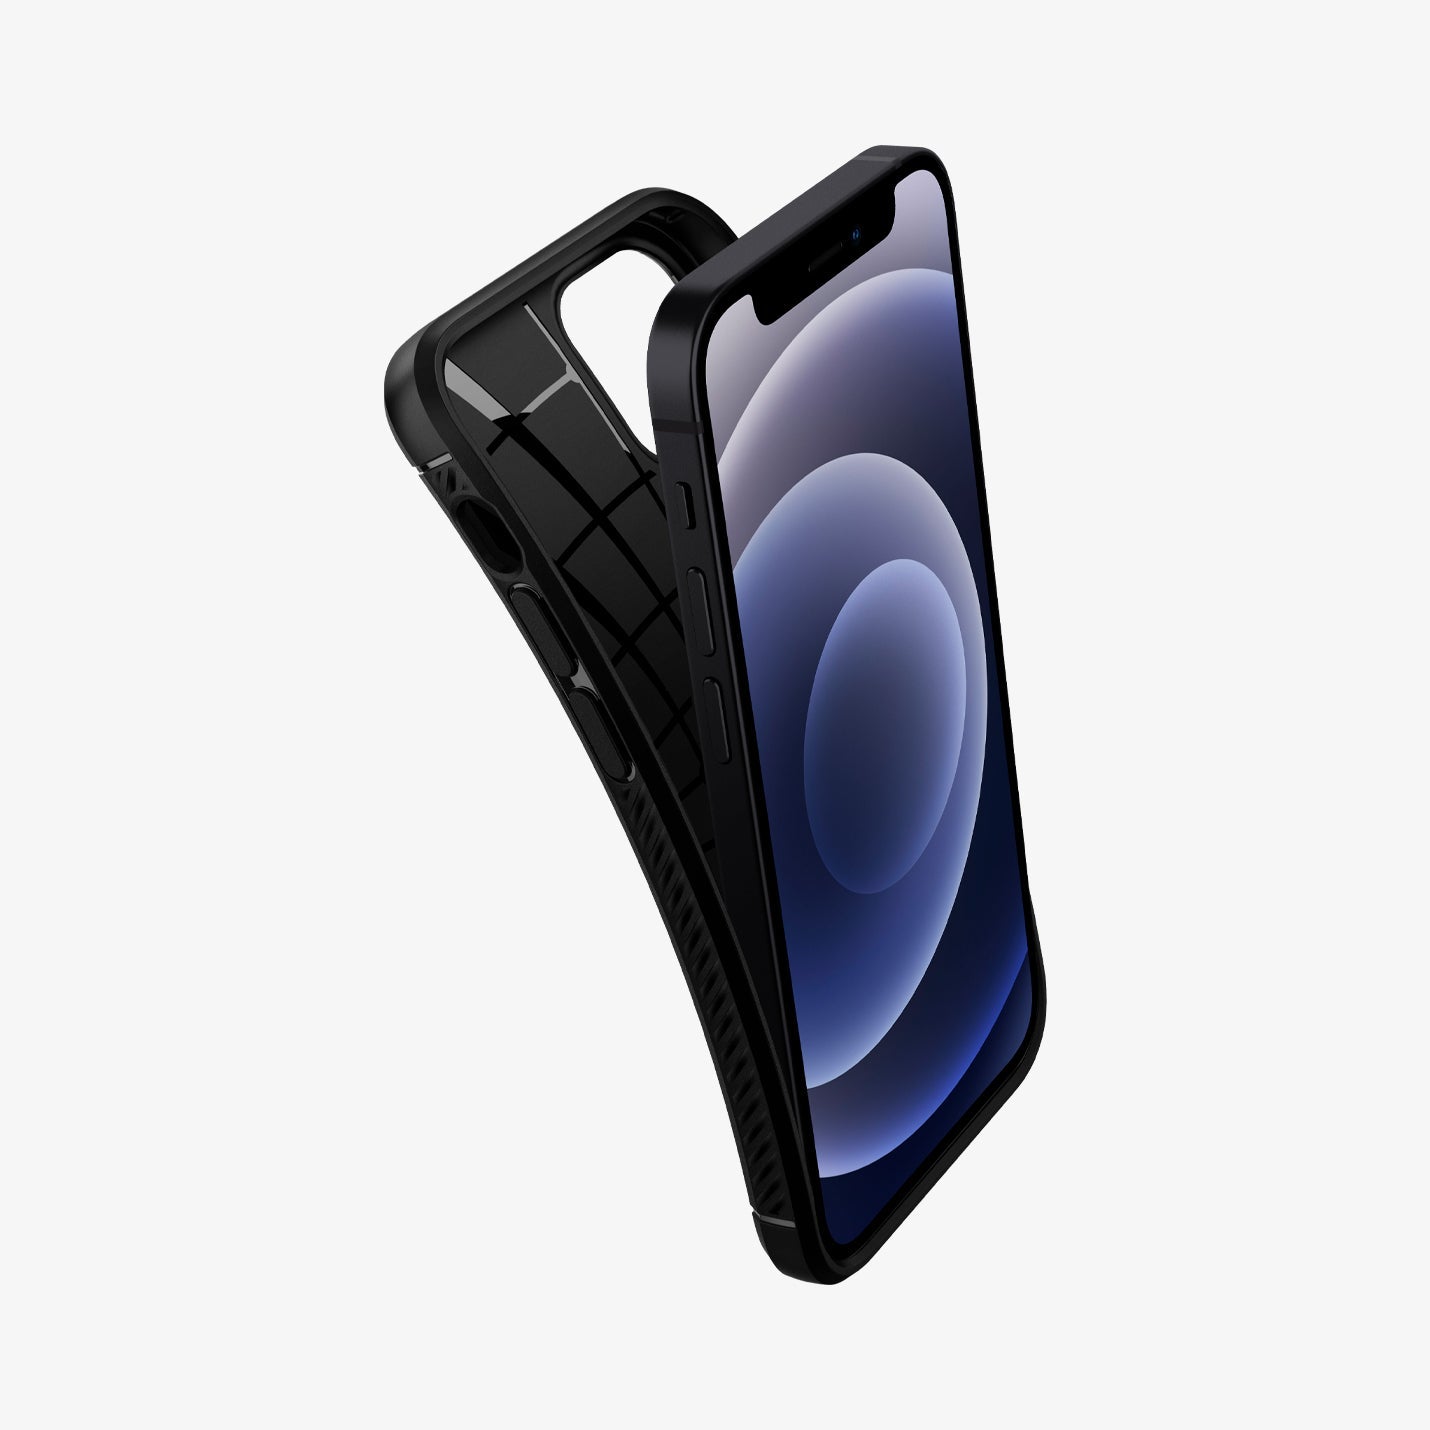 ACS01743 - iPhone 12 Mini Case Rugged Armor in matte black showing the case bending away from device to show the flexibility